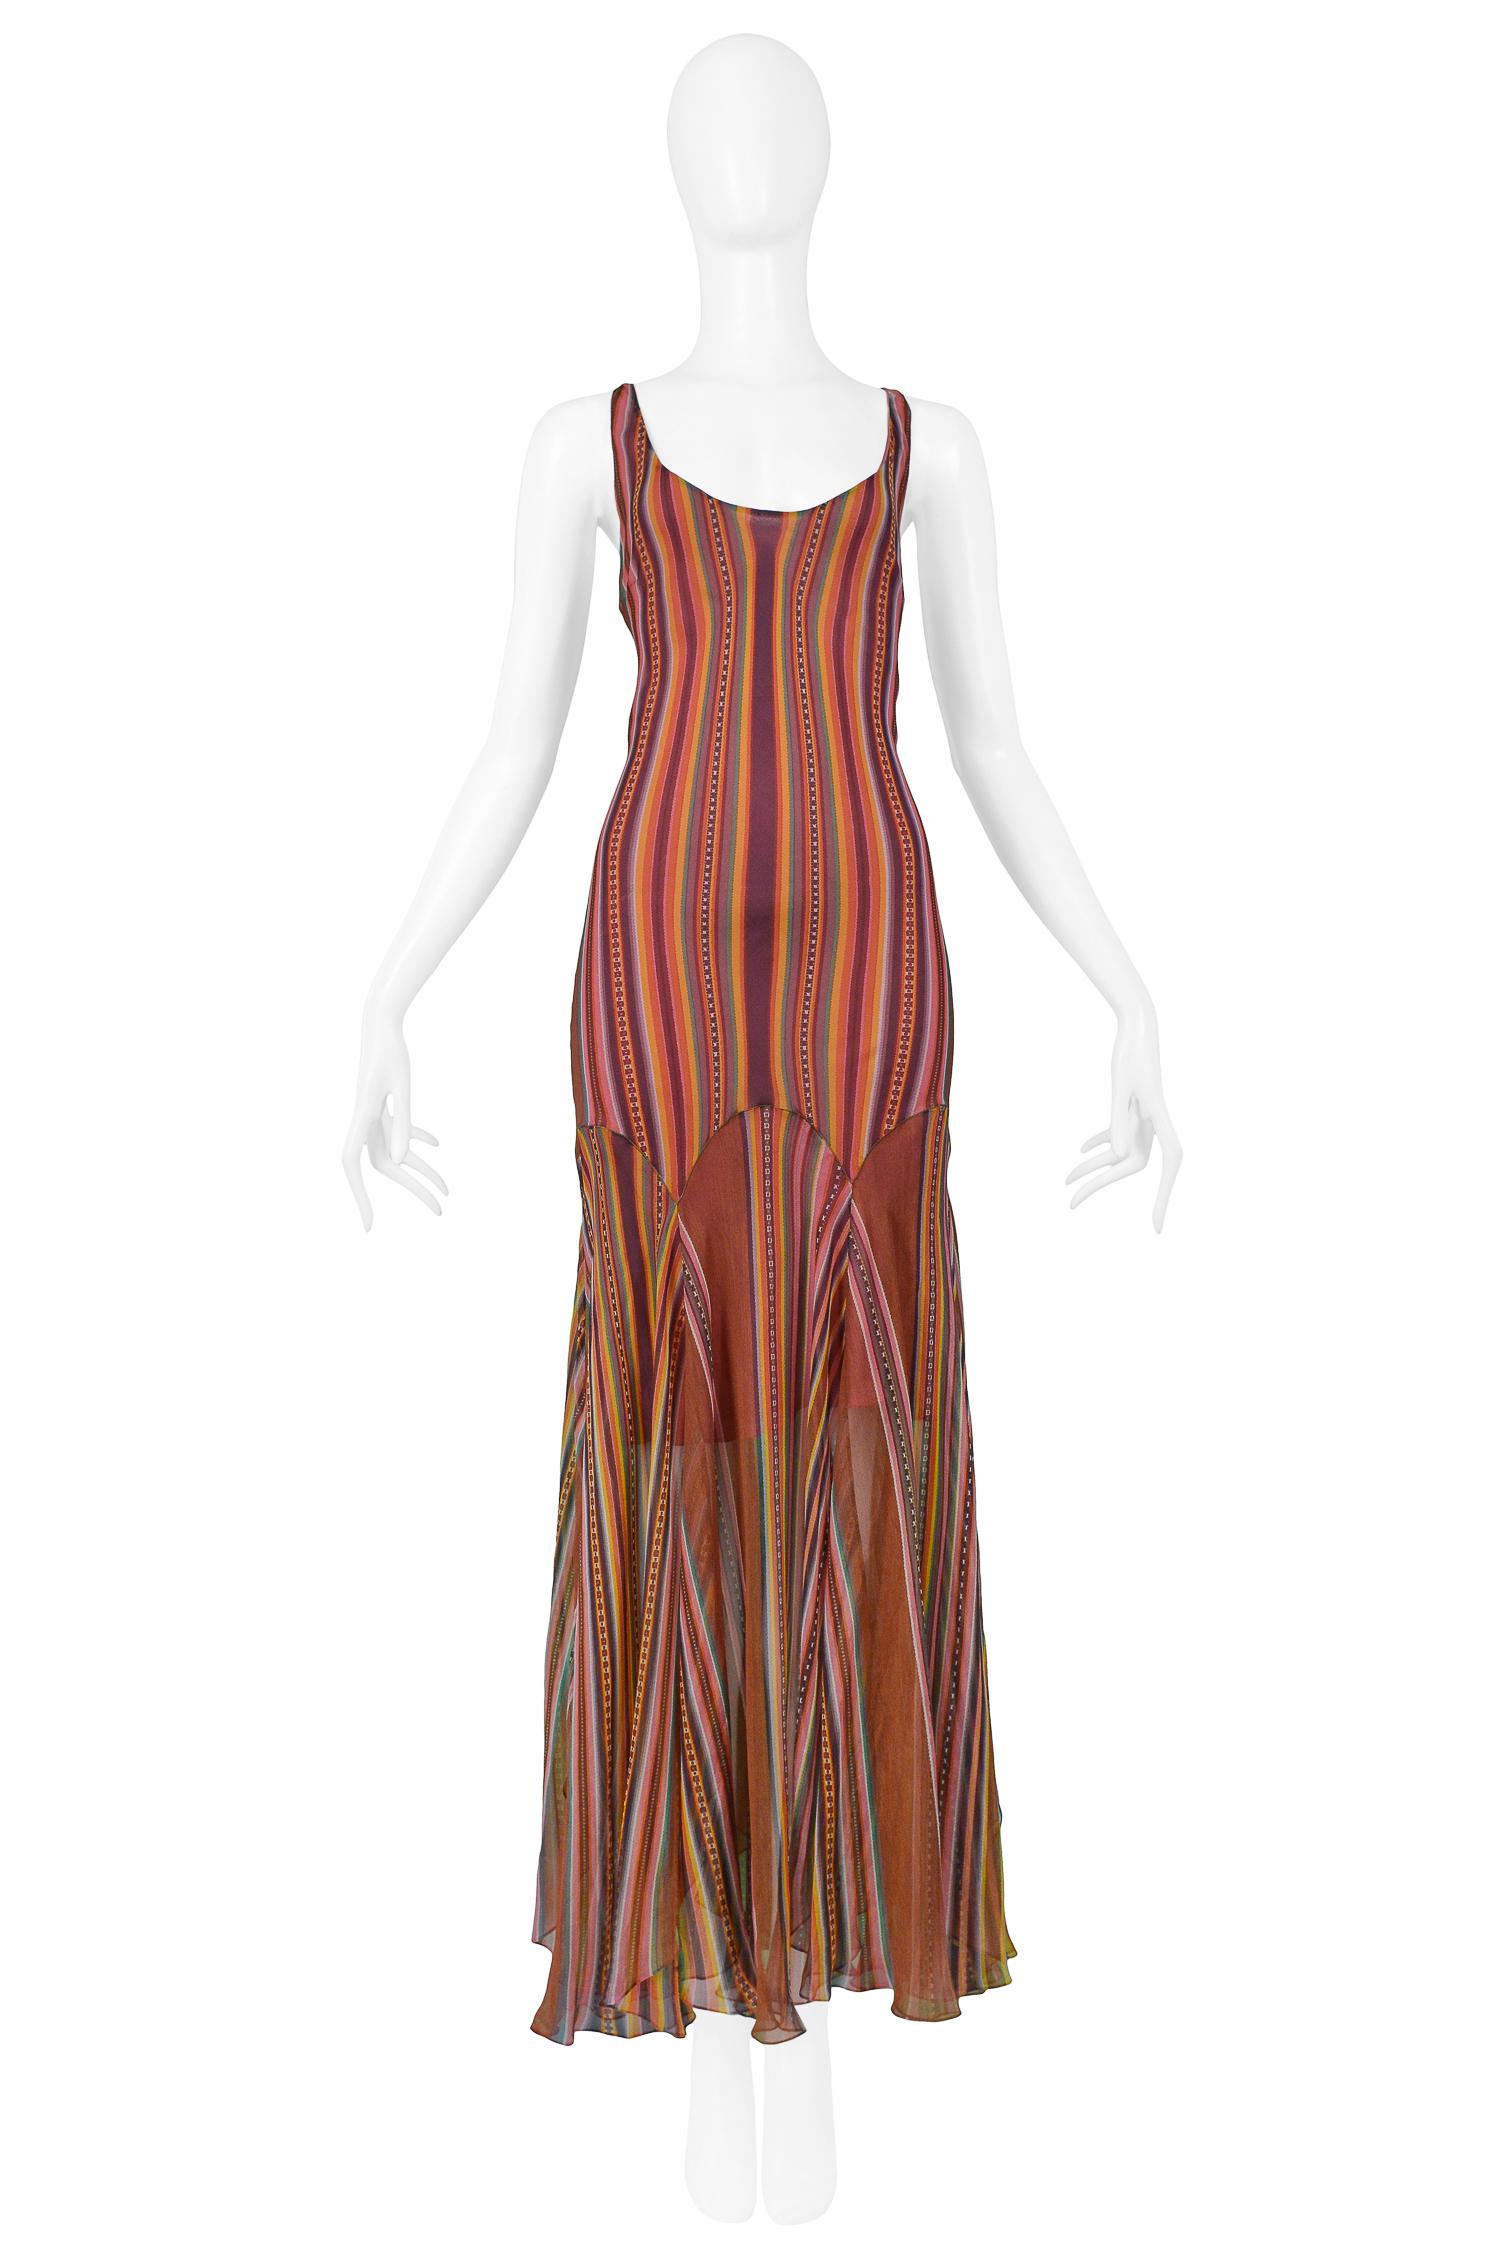 Vintage Christian Dior silk multicolor striped bias cut slip dress with partial lining and mermaid style godets at skirt. Collection Spring 2002.

Excellent Vintage Condition.

Size 40